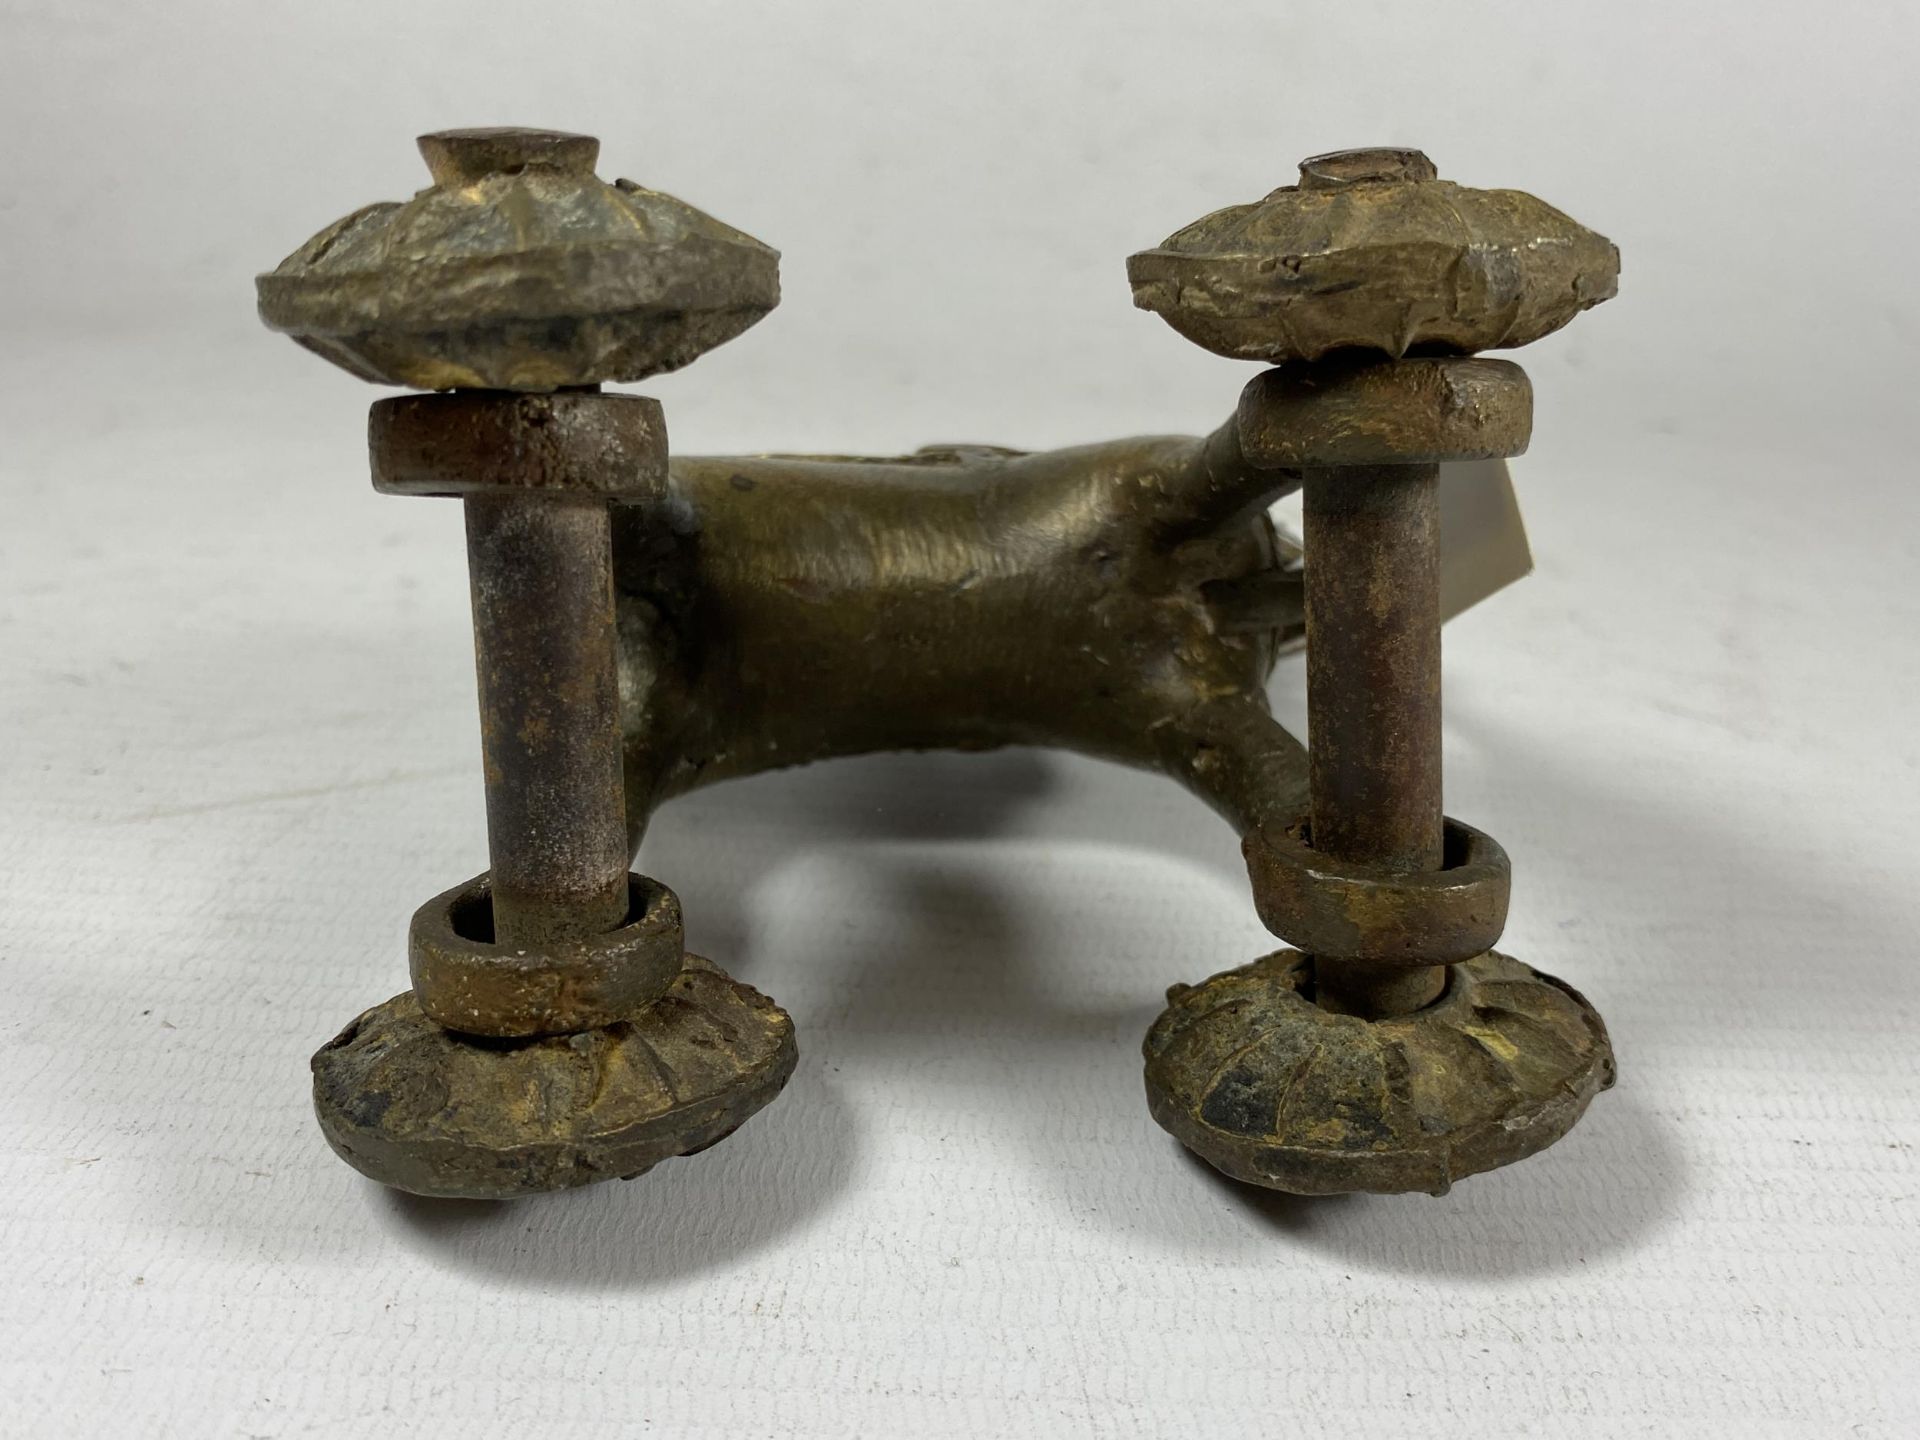 AN UNUSUAL 19TH CENTURY INDIAN METAL TEMPLE TOY MODEL OF A HORSE AND RIDER, HEIGHT 12CM - Image 4 of 4